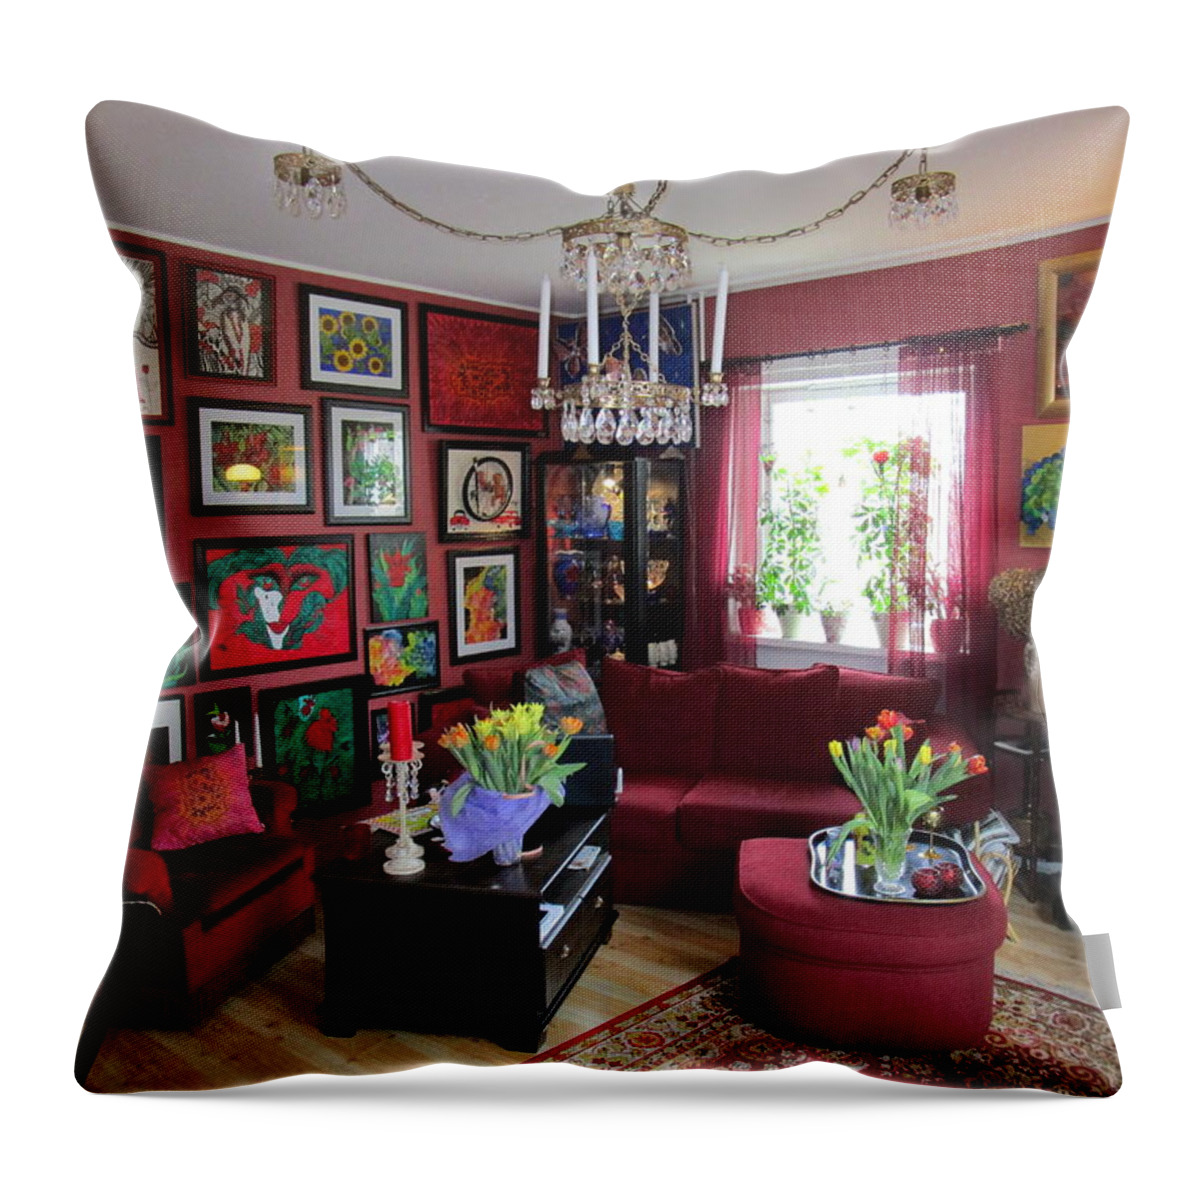 Pictures Throw Pillow featuring the photograph An Artists Livingroom by Rosita Larsson